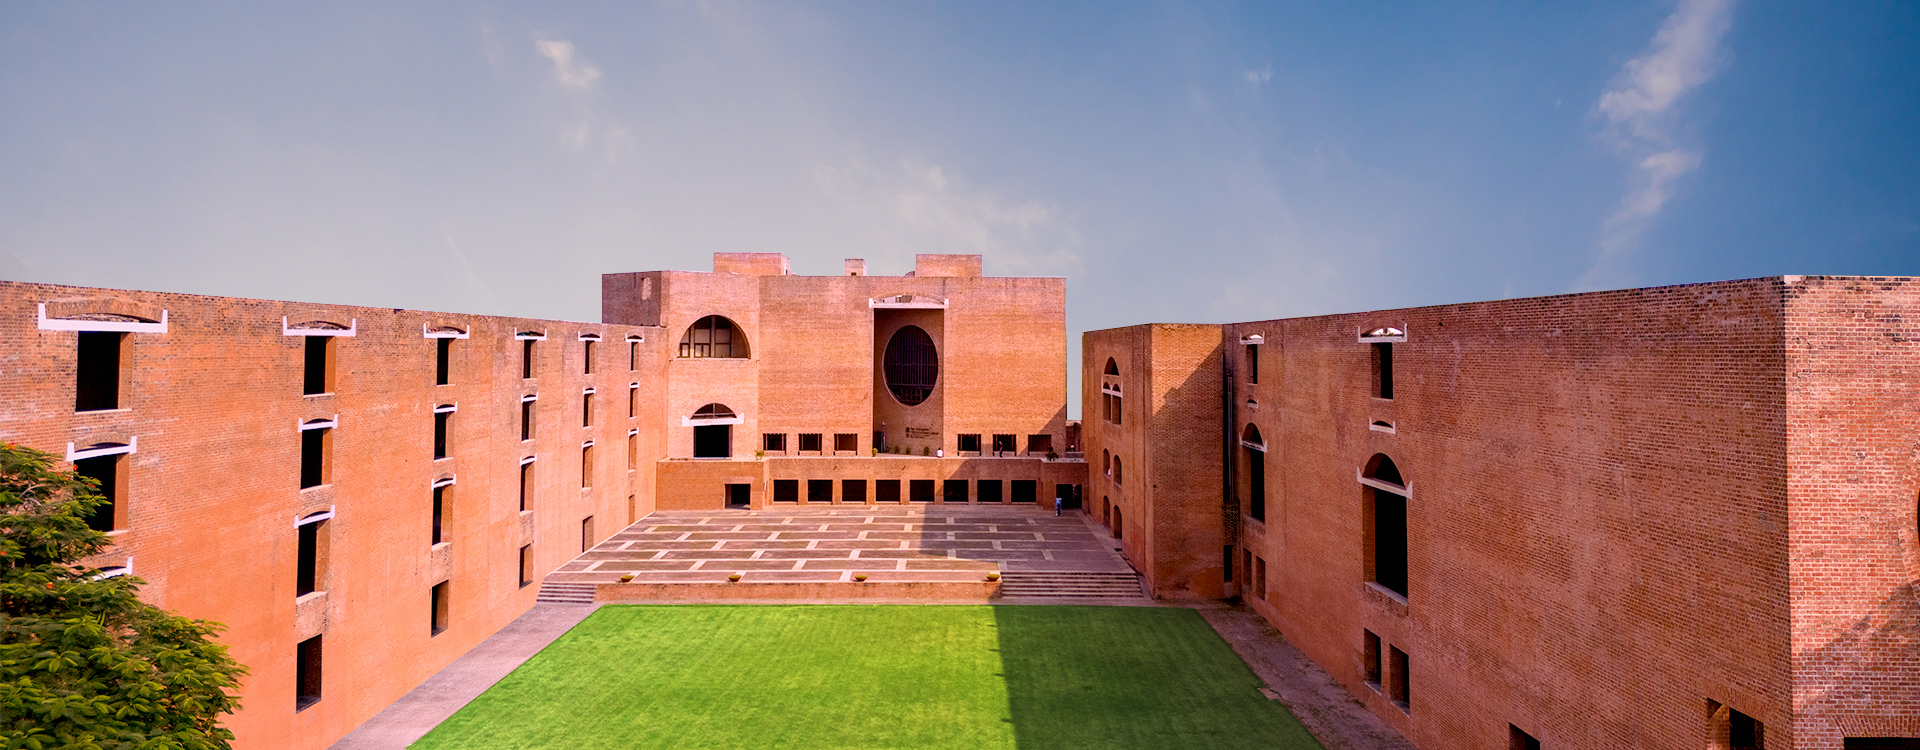 https://m.economictimes.com/industry/services/education/iim-ahmedabad-announces-appointment-of-professor-bharat-bhasker-as-new-director/amp_articleshow/97254992.cms